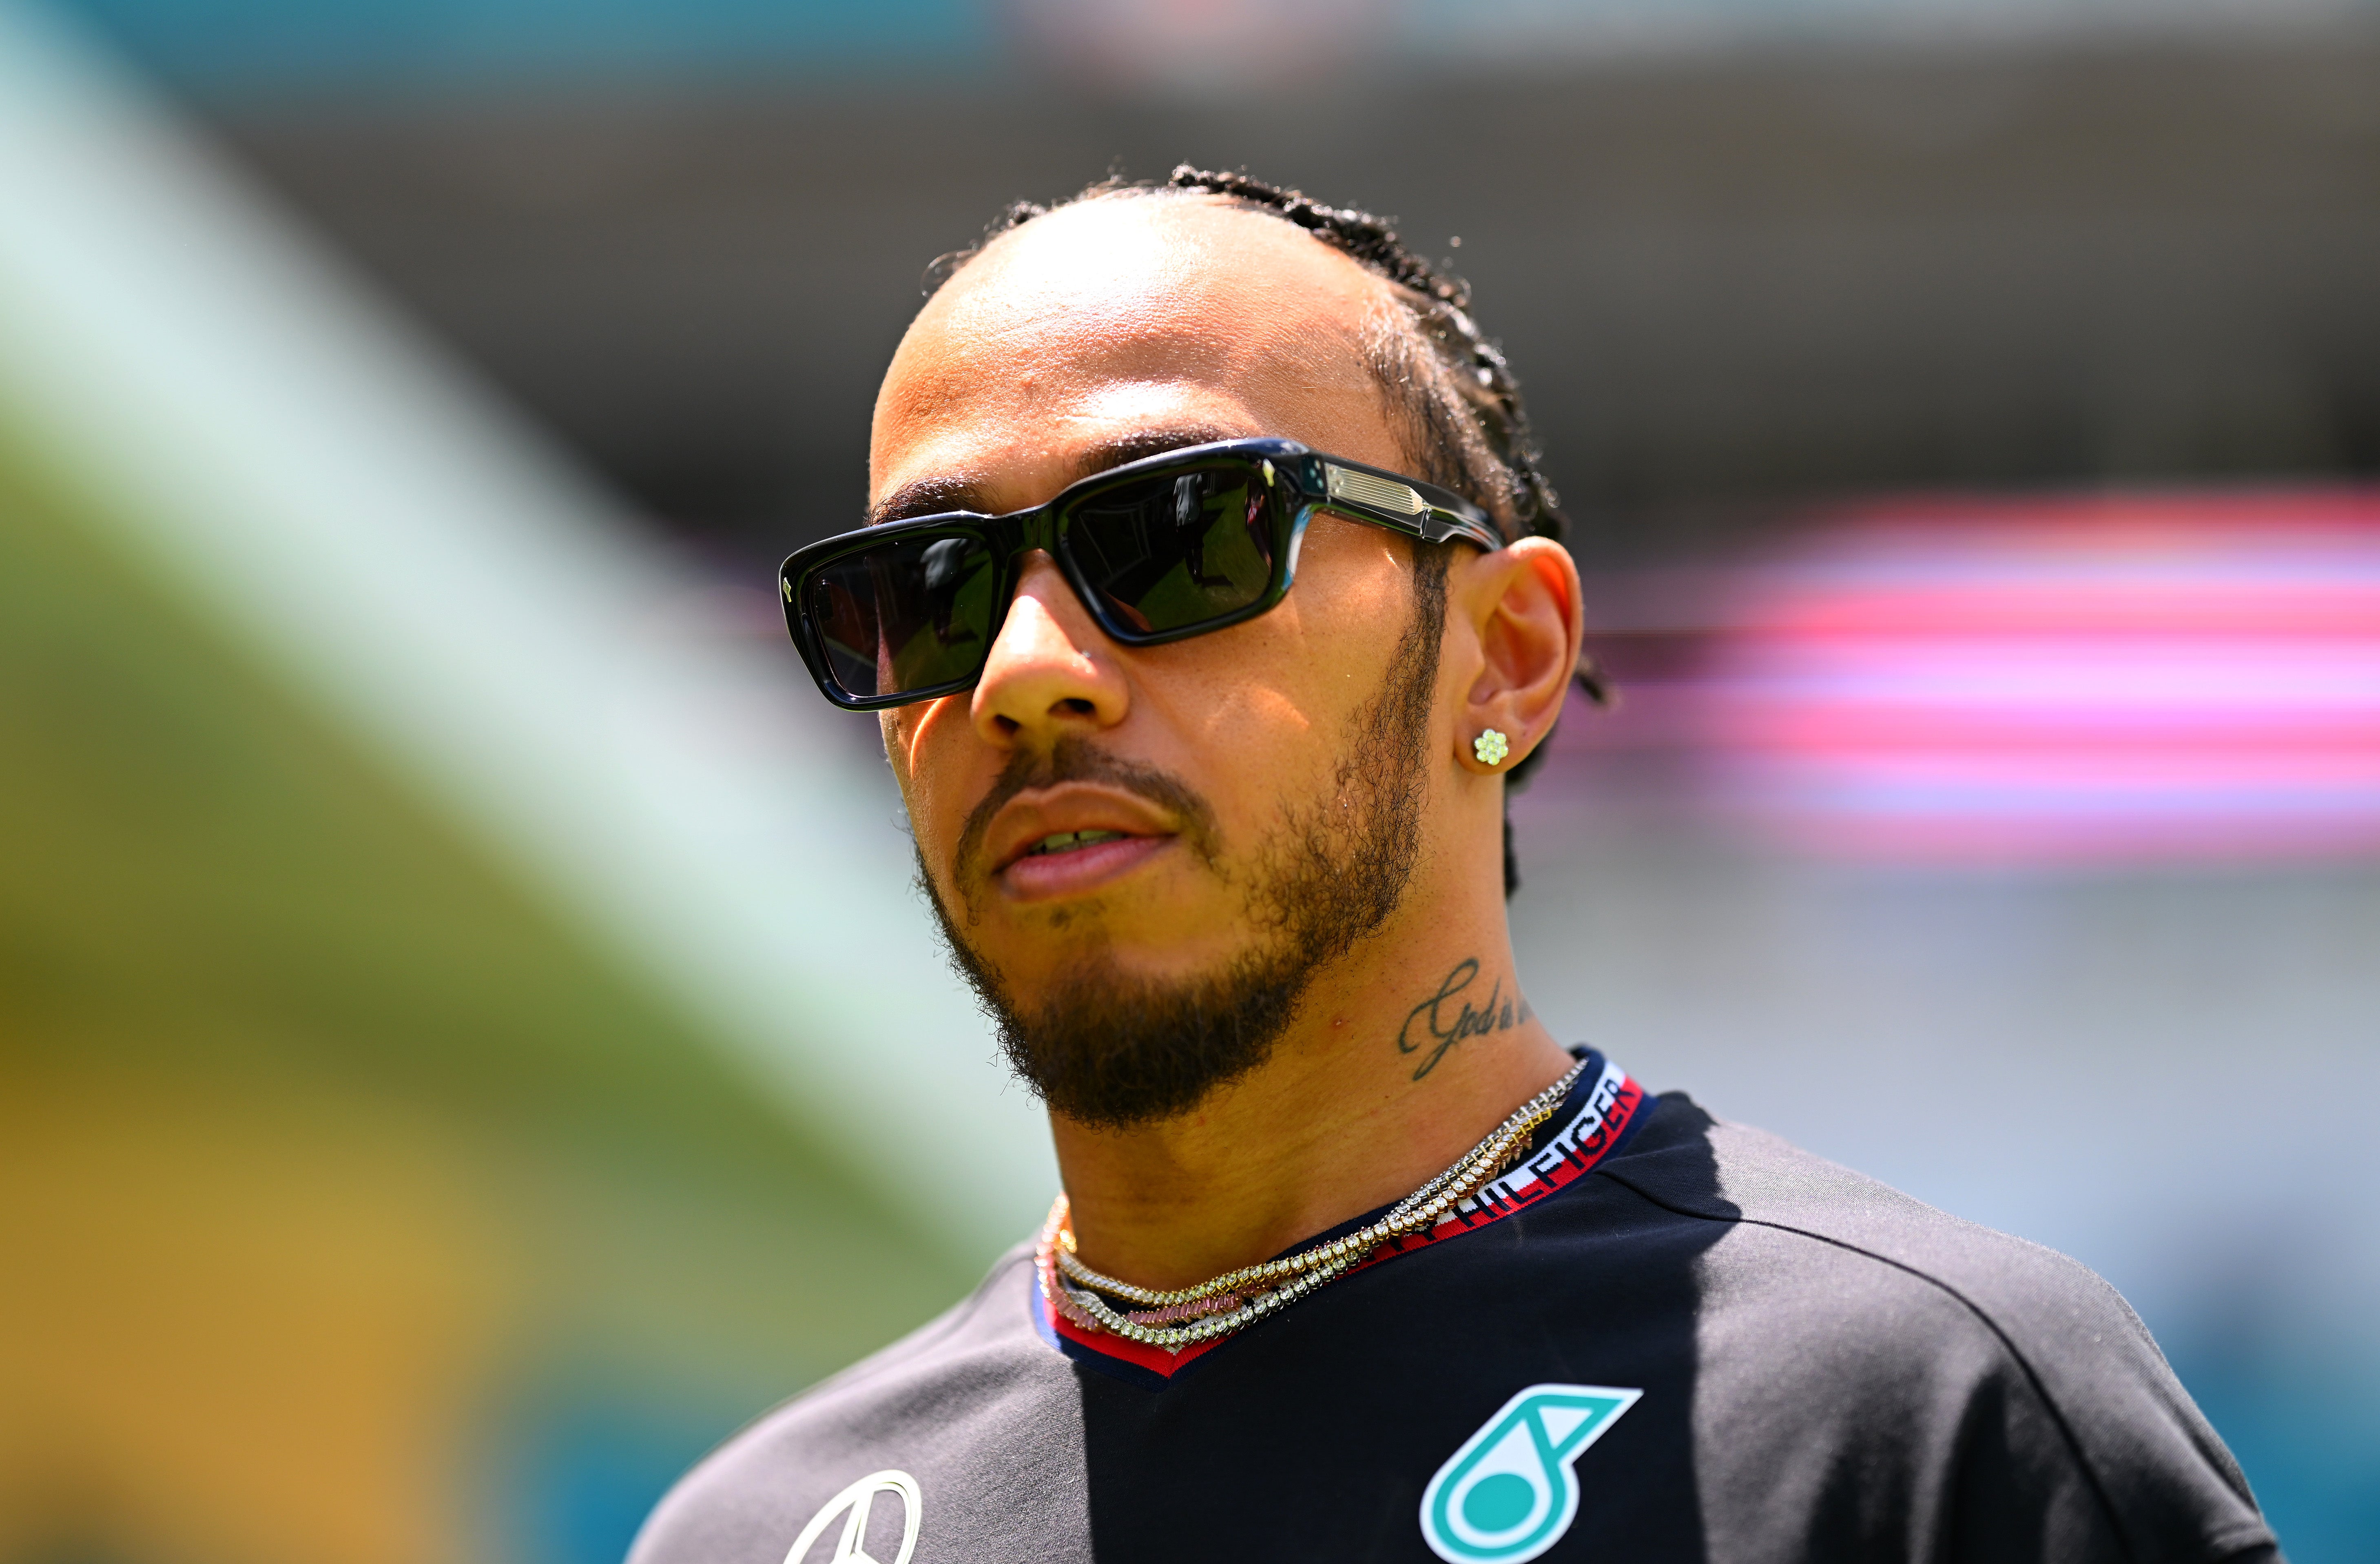 Lewis Hamilton qualified only 12th for Saturday’s sprint race in Miami